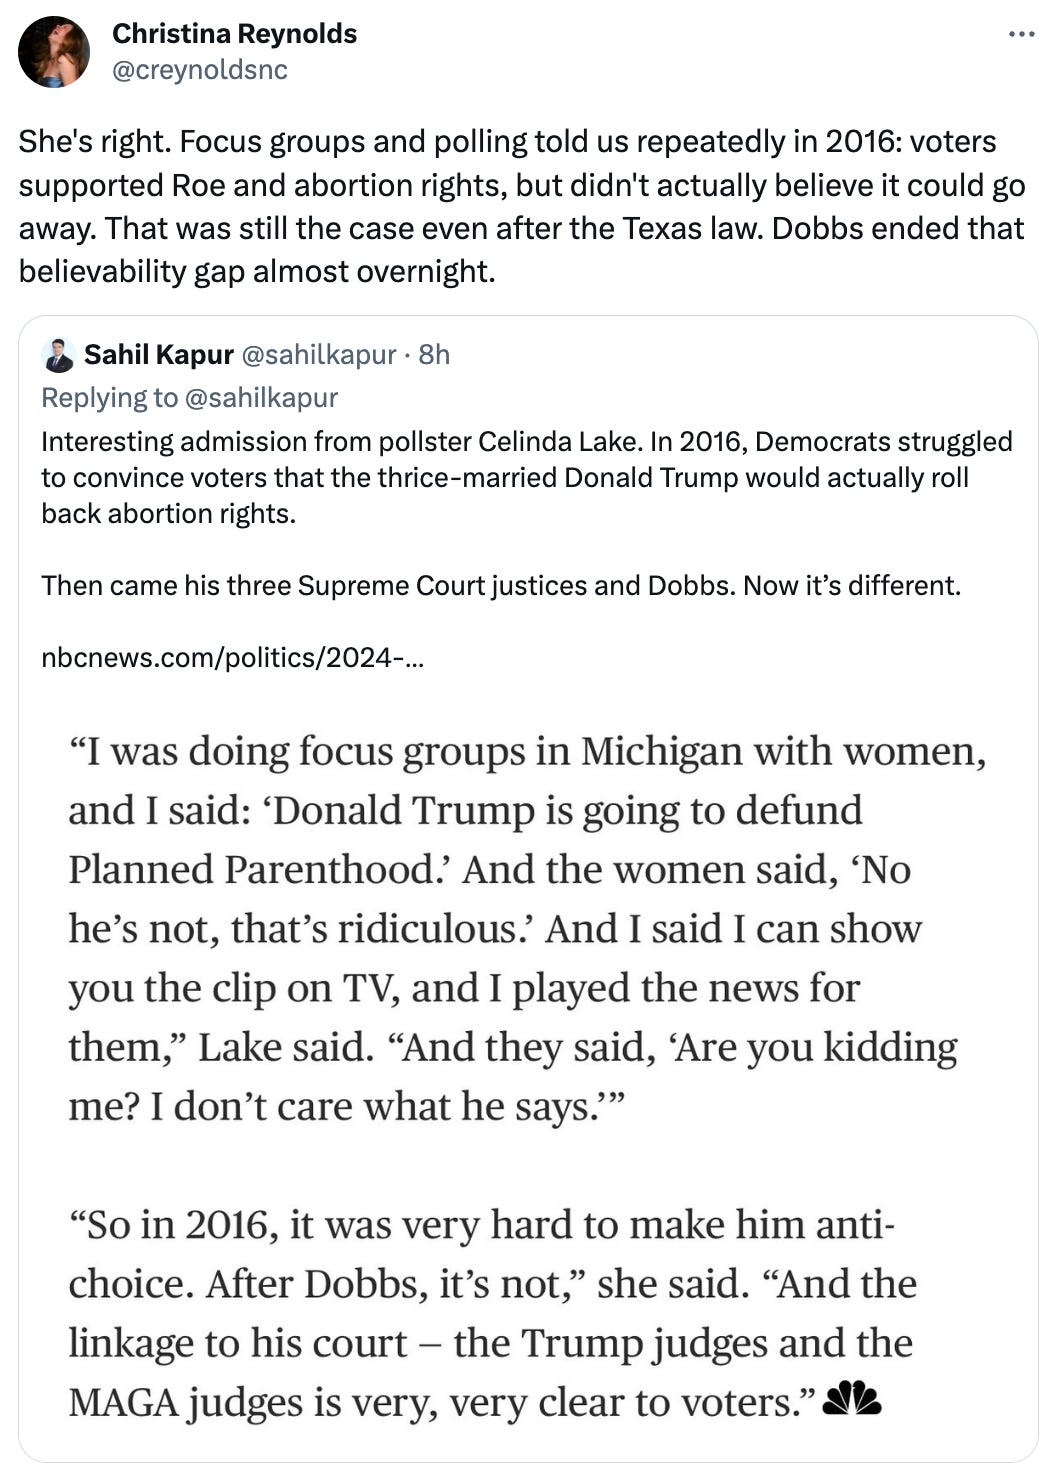  See new Tweets Conversation Christina Reynolds @creynoldsnc She's right. Focus groups and polling told us repeatedly in 2016: voters supported Roe and abortion rights, but didn't actually believe it could go away. That was still the case even after the Texas law. Dobbs ended that believability gap almost overnight. Quote Tweet Sahil Kapur @sahilkapur · 8h Replying to @sahilkapur Interesting admission from pollster Celinda Lake. In 2016, Democrats struggled to convince voters that the thrice-married Donald Trump would actually roll back abortion rights.  Then came his three Supreme Court justices and Dobbs. Now it’s different.  https://nbcnews.com/politics/2024-election/abortion-setback-ohio-alarms-gop-democrats-see-roadmap-2024-rcna99029